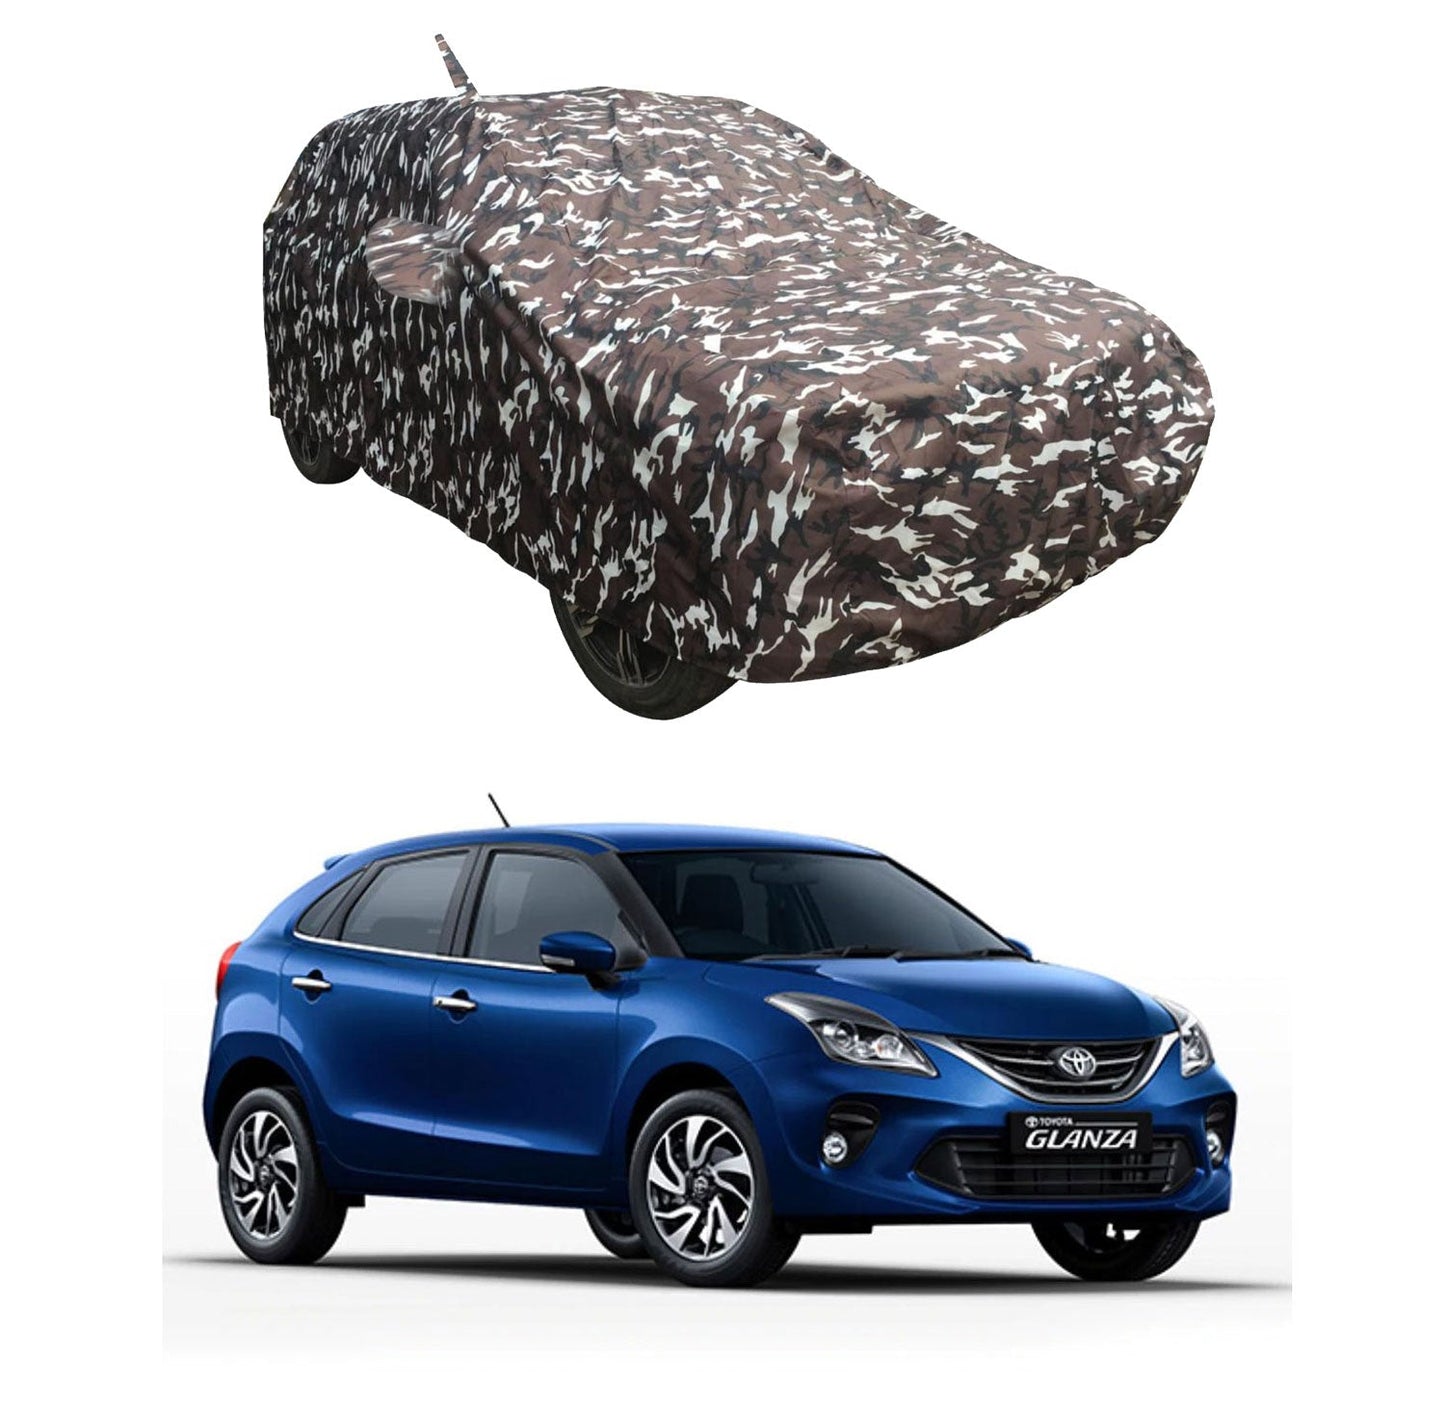 Oshotto Ranger Design Made of 100% Waterproof Fabric Multicolor Car Body Cover with Mirror Pockets For Toyota Glanza (with Antenna Pocket)